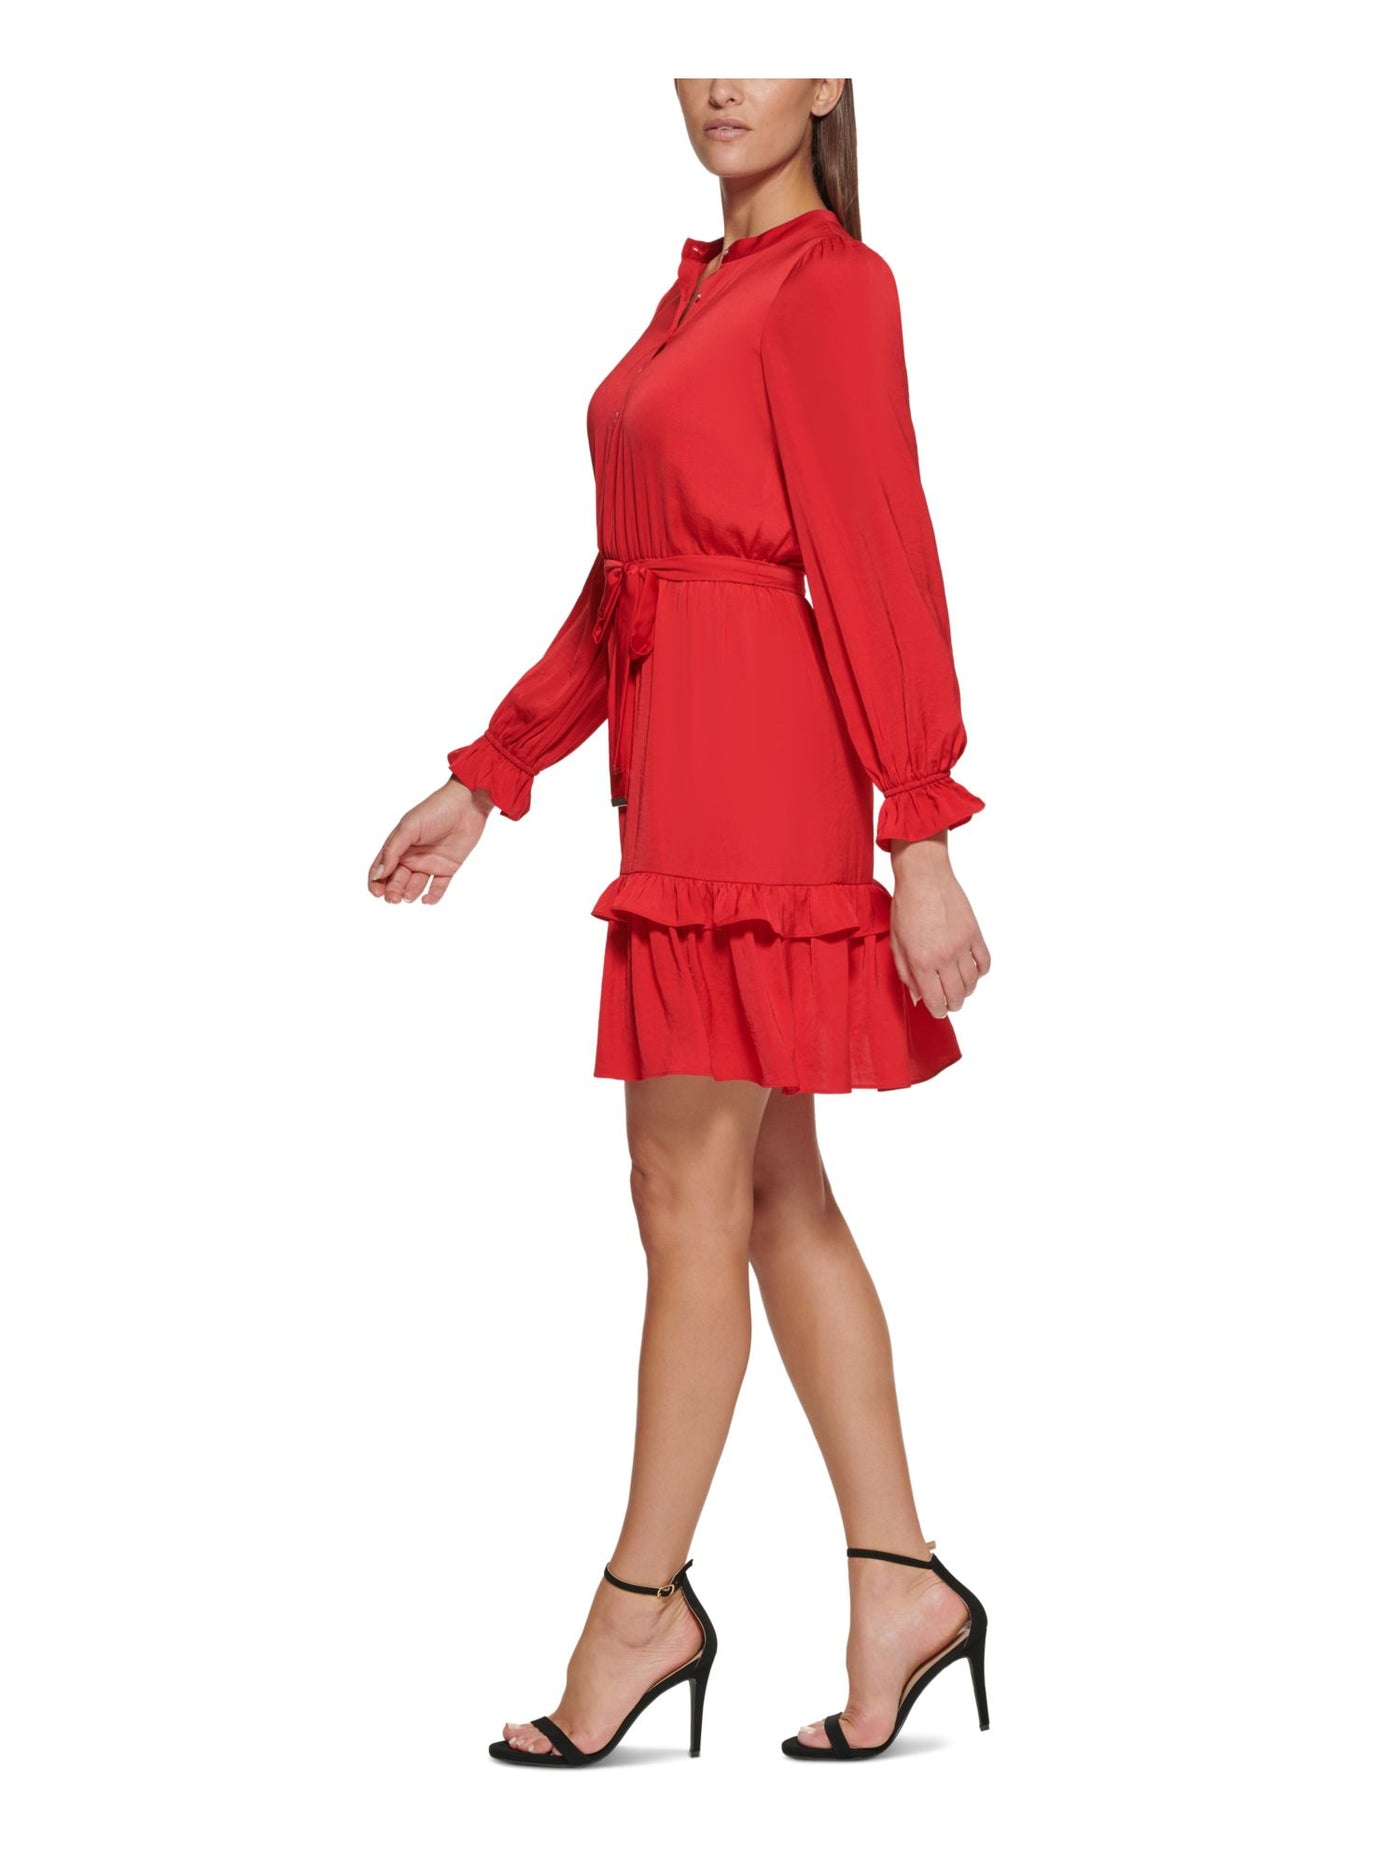 TOMMY HILFIGER Womens Red Ruffled Pull-on Style Blouson Sleeve Round Neck Above The Knee Party Shift Dress Petites 12P